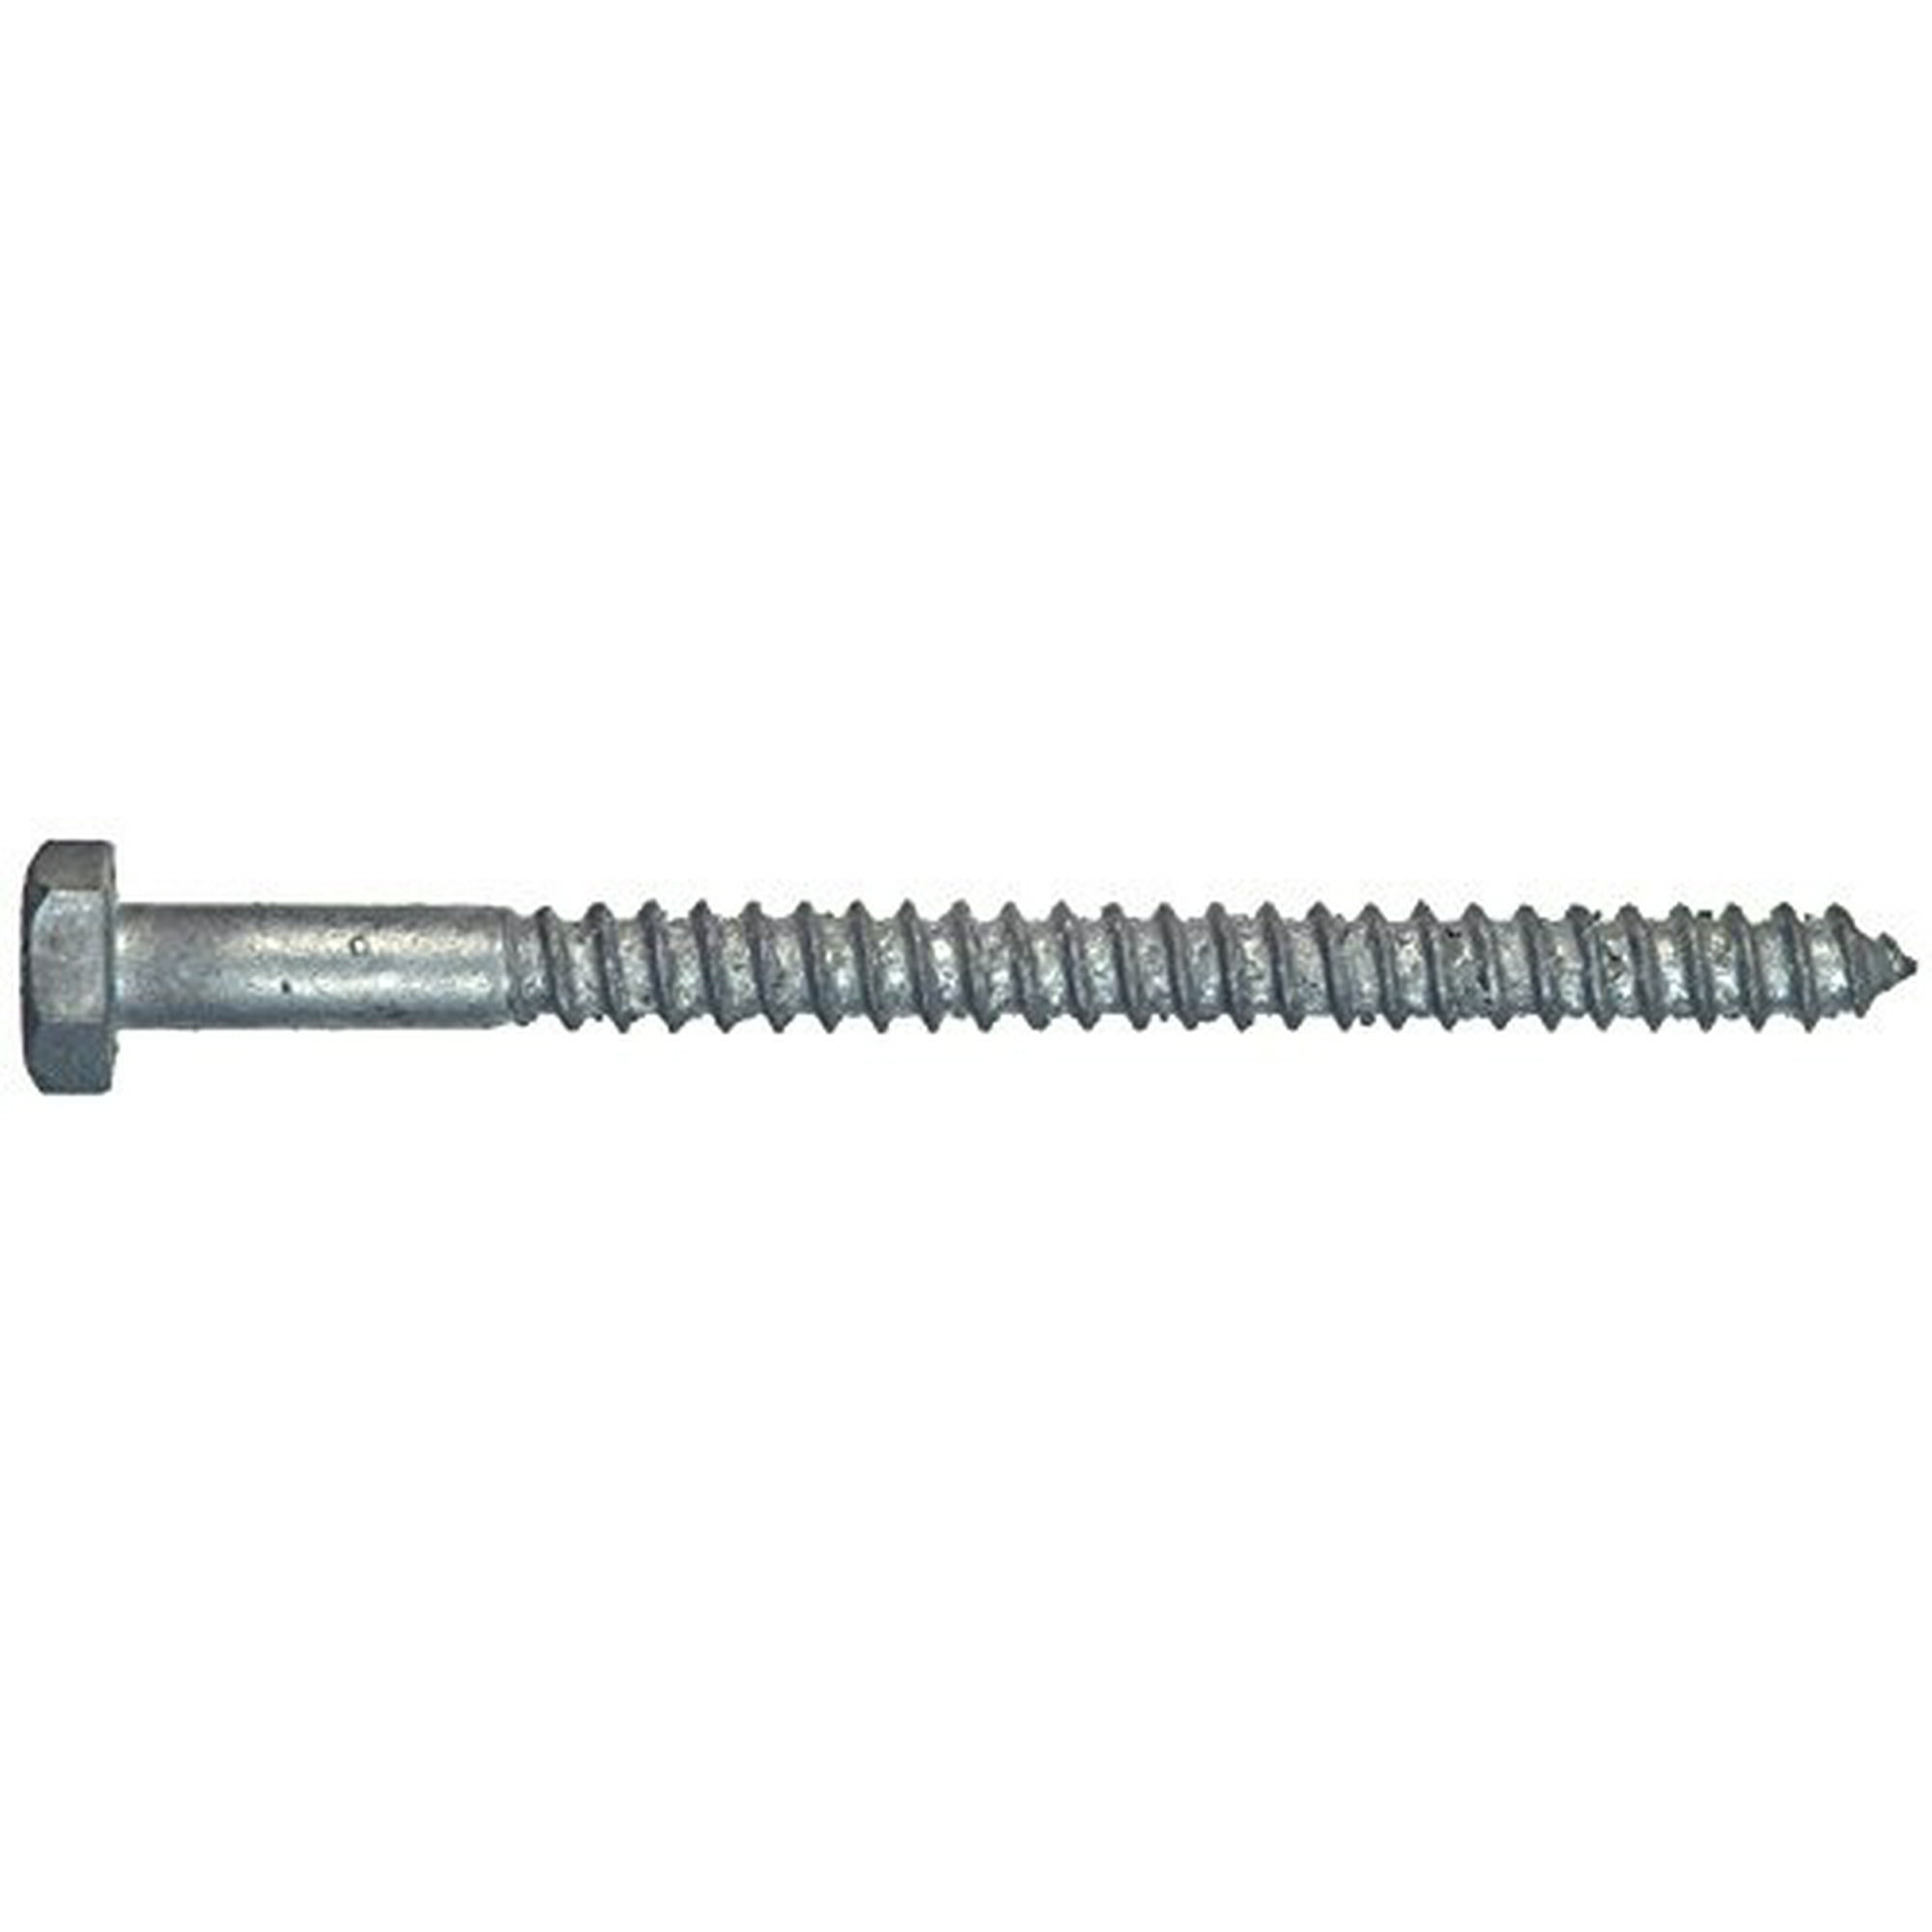 The Hillman Group 812173 Hot Dipped Galavanized Hex Lag Screw 20-Pack 3/4 x 3-Inch 